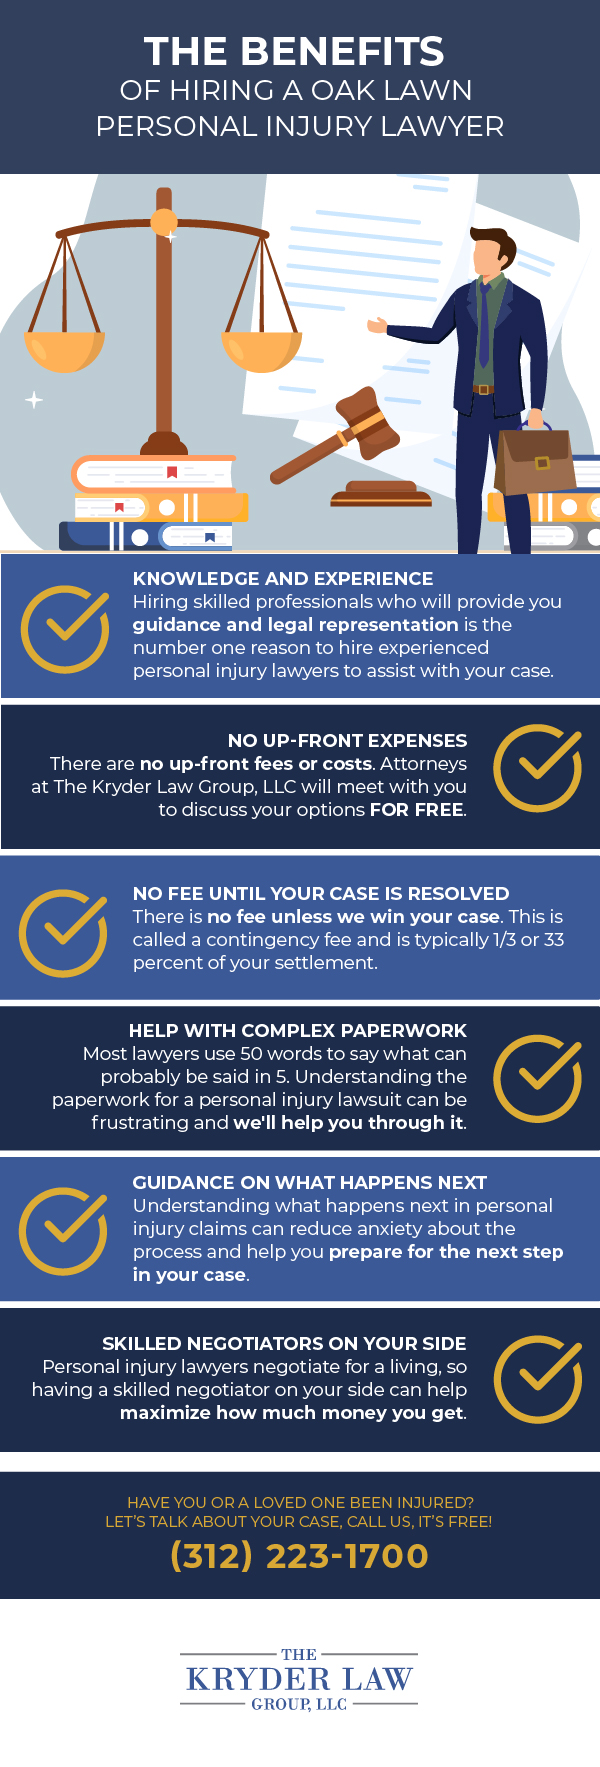 The Benefits of Hiring an Oak Lawn Personal Injury Lawyer Infographic